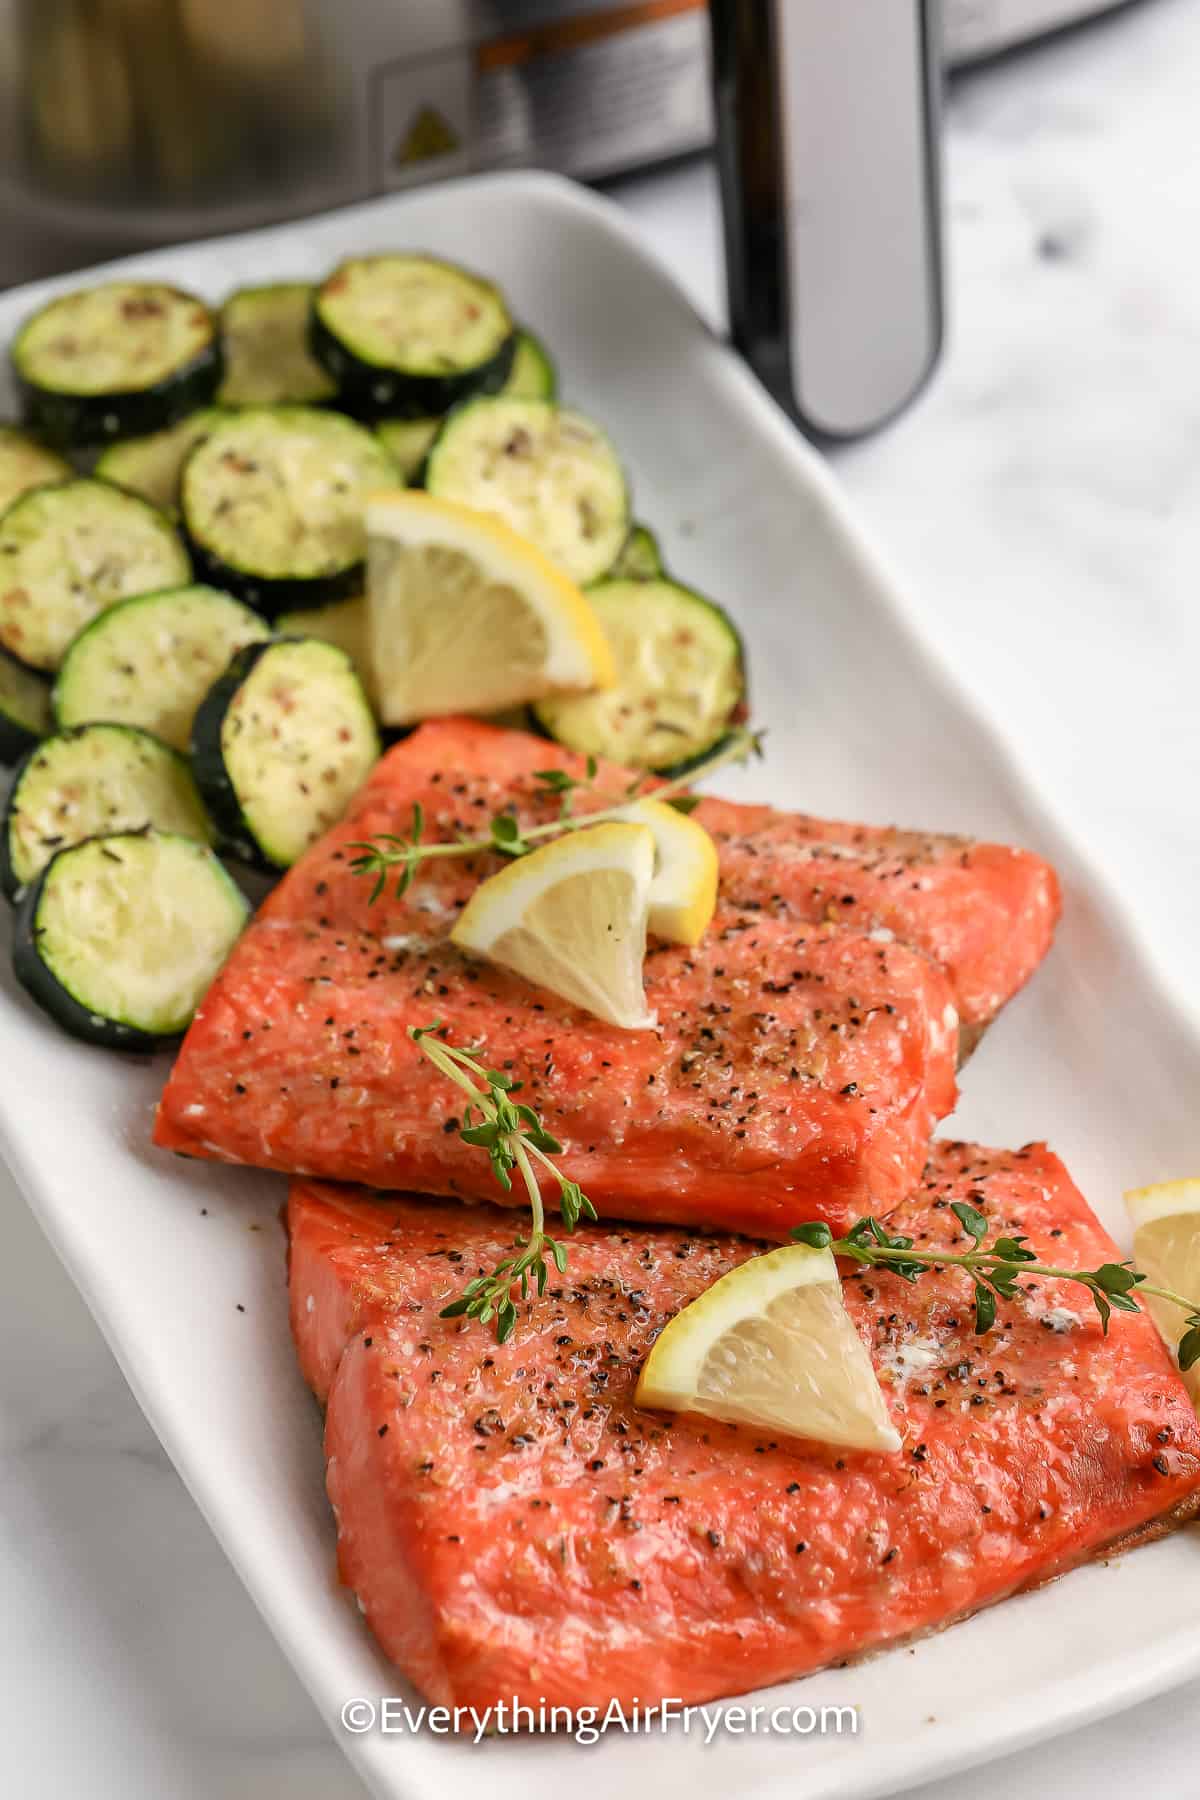 A plate of Air Fryer Salmon and Zucchini garnished with lemons